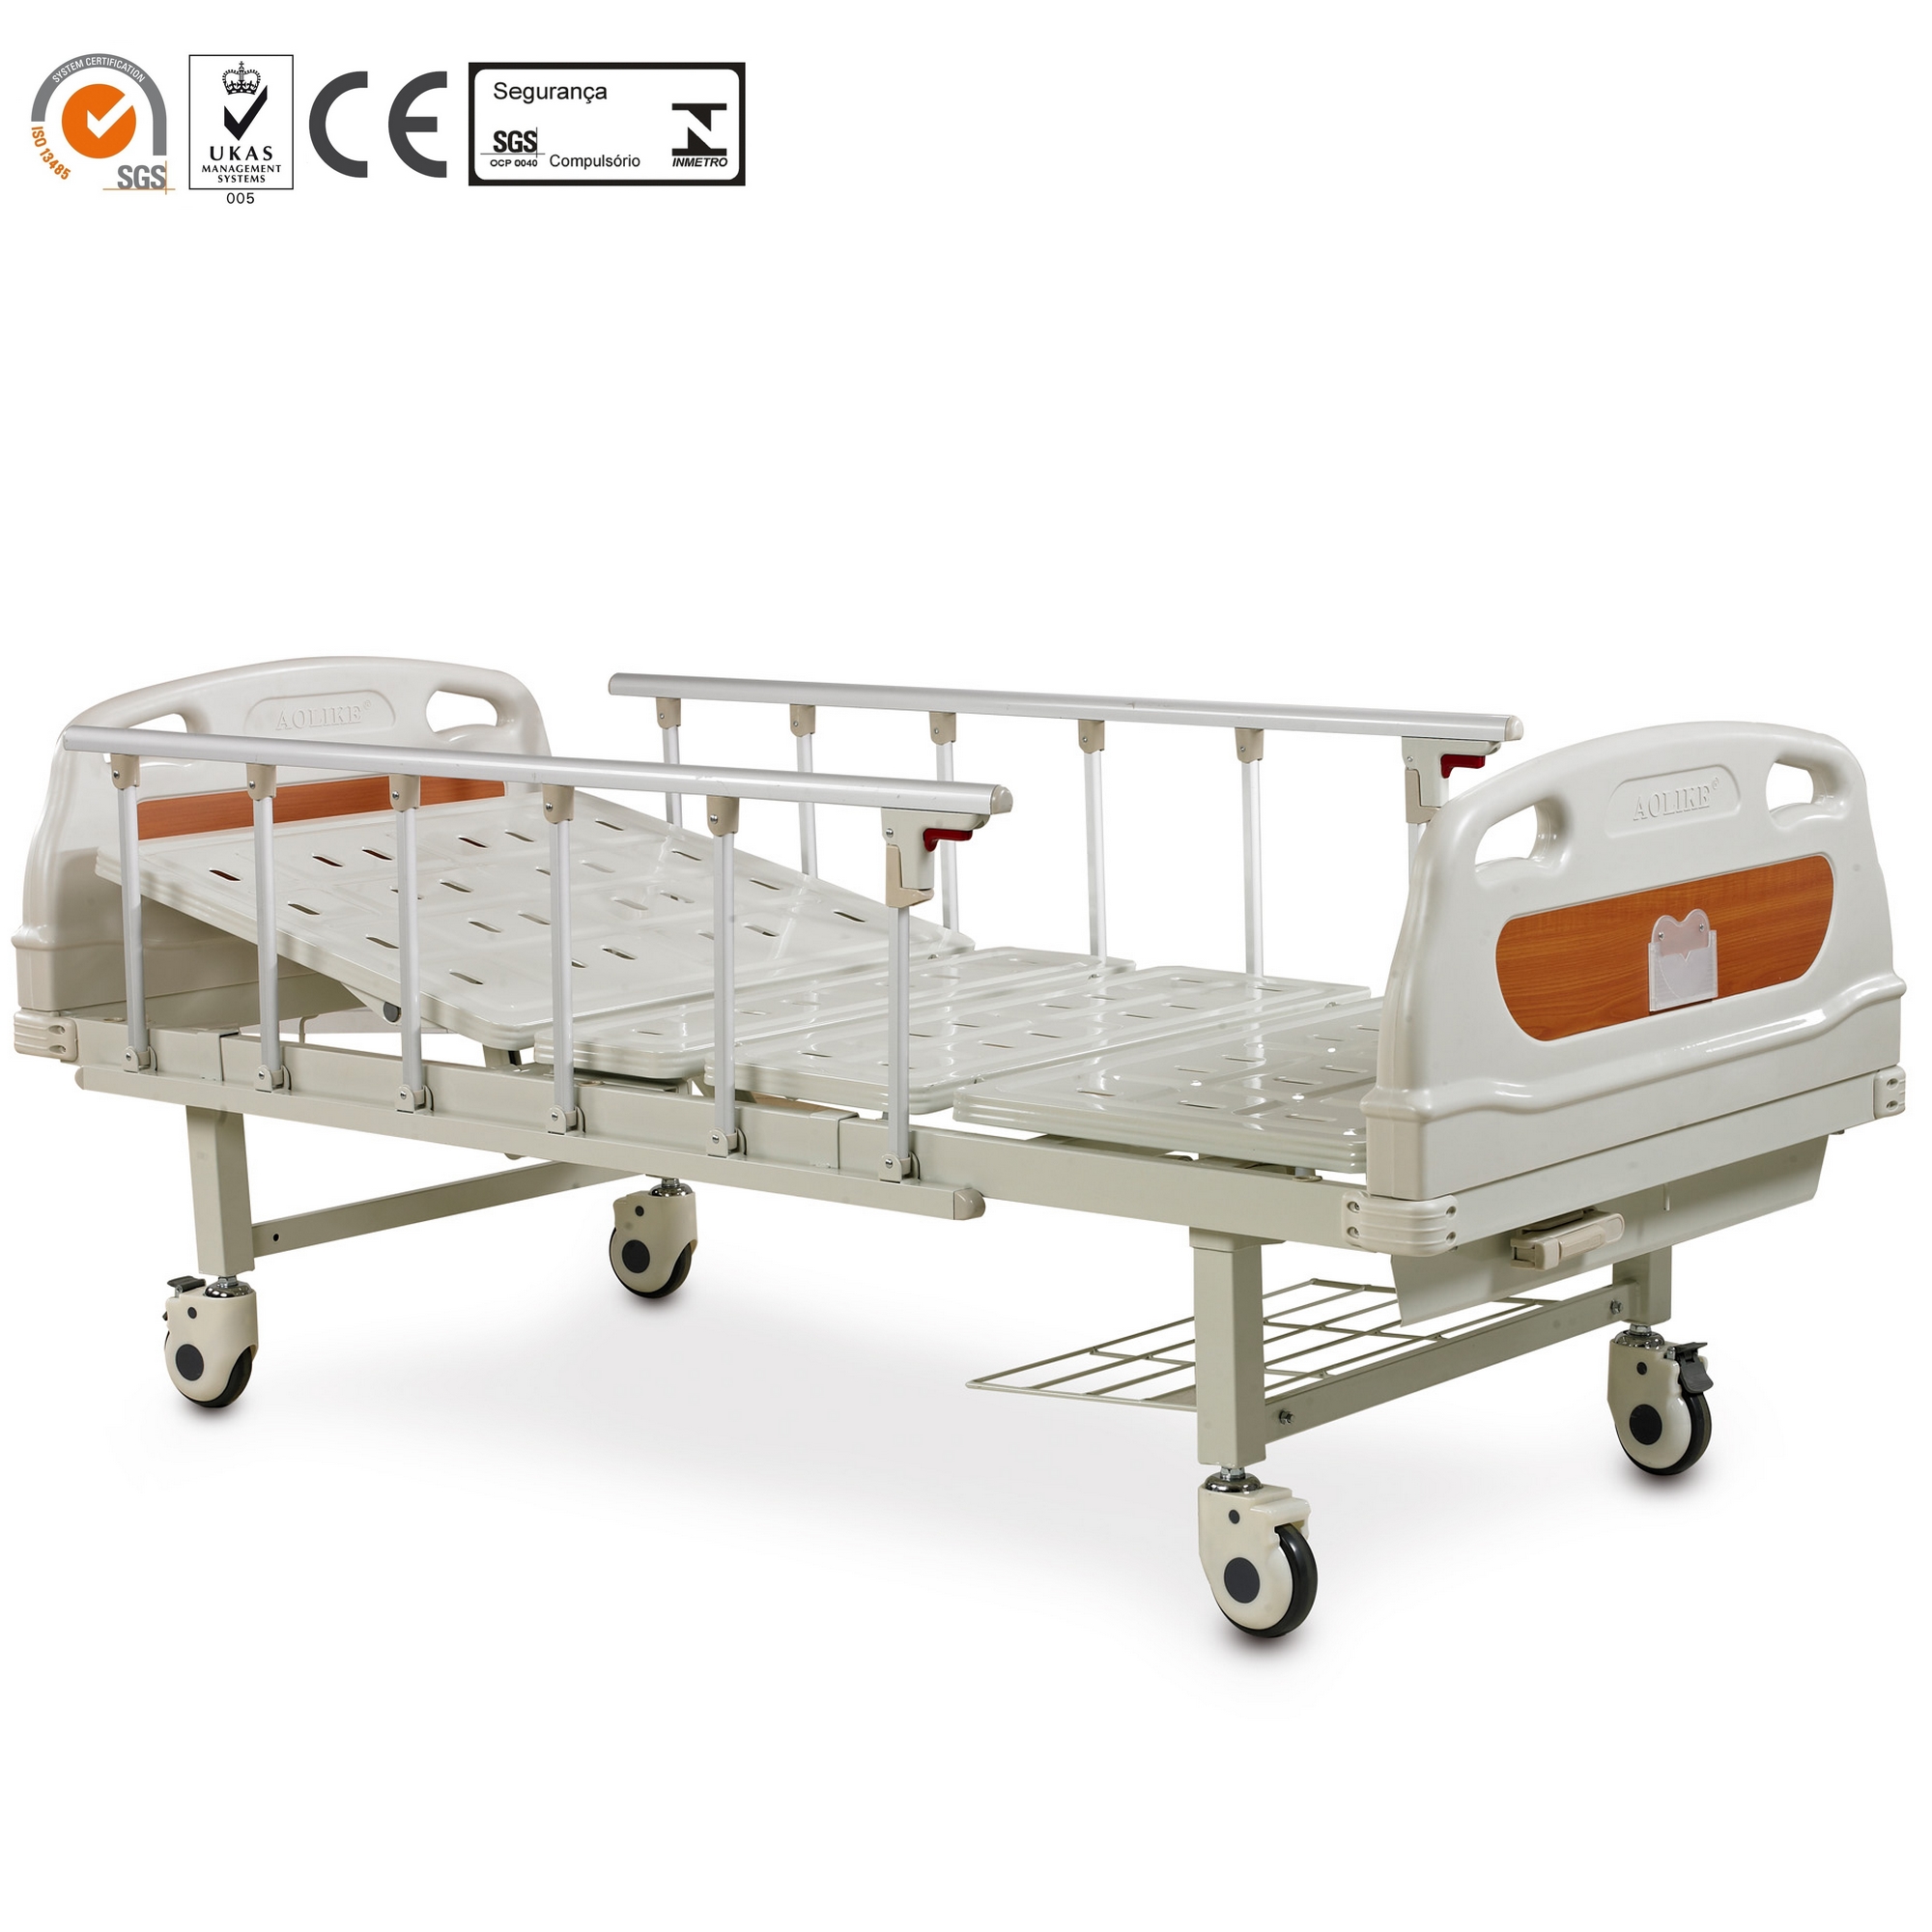 Single Crank High Quality Cost-competitiveness Manual Fowler Bed 1 YEAR Free Spare Parts ALK06-A132P Metal